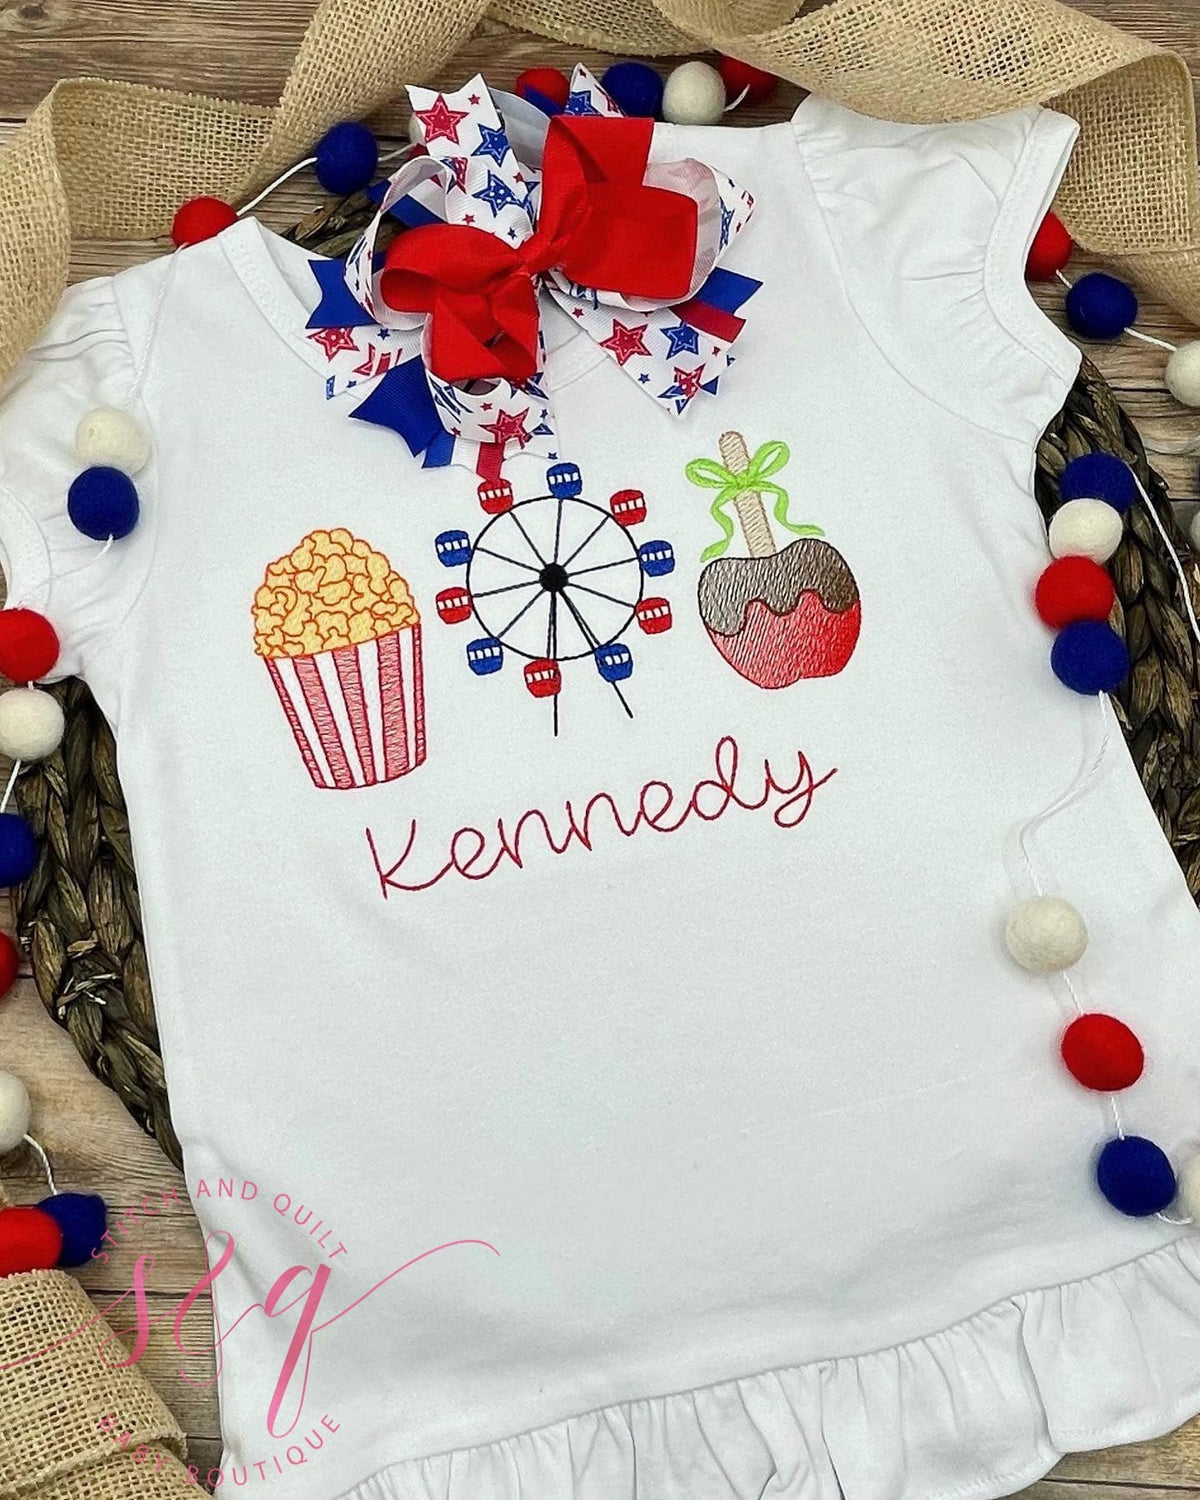 Carnival-inspired Girls&#39; Ruffle Shirt with Popcorn, Ferris Wheel, and Candy Apple Embroidery, Sketch Embroidery, Optional Red Ruffle Short